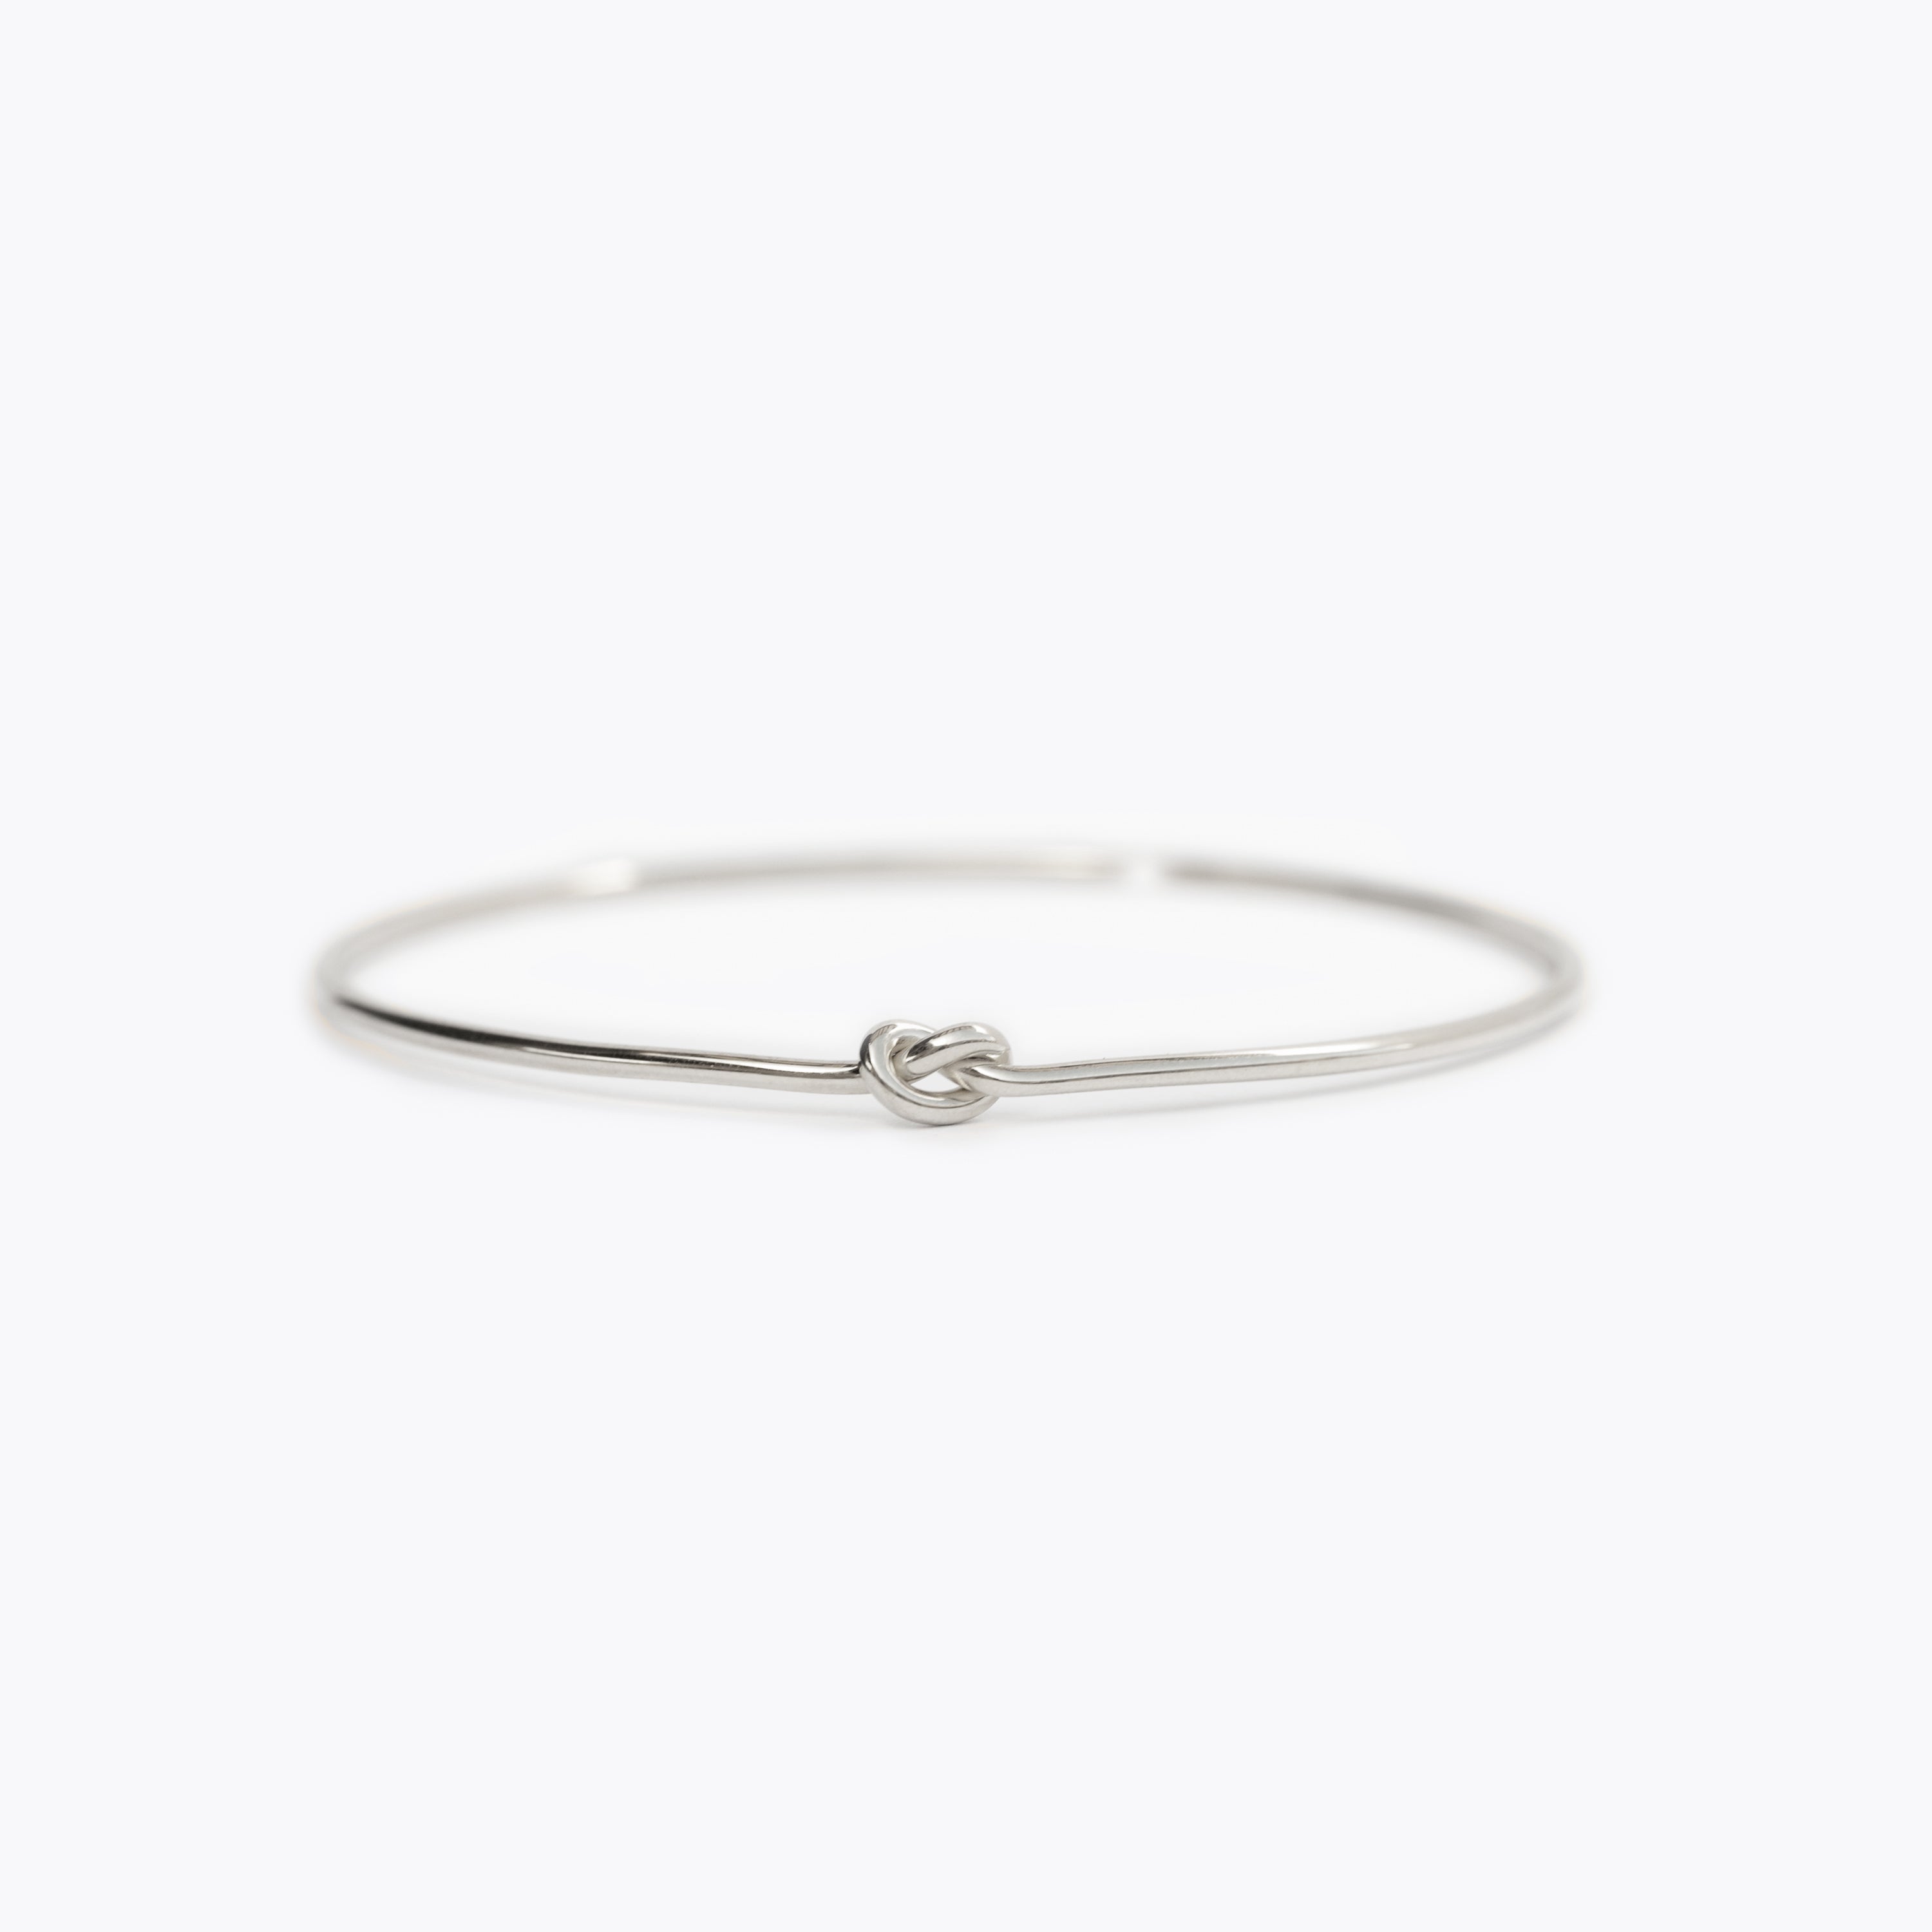 The Heavy Weight Knot Bangle